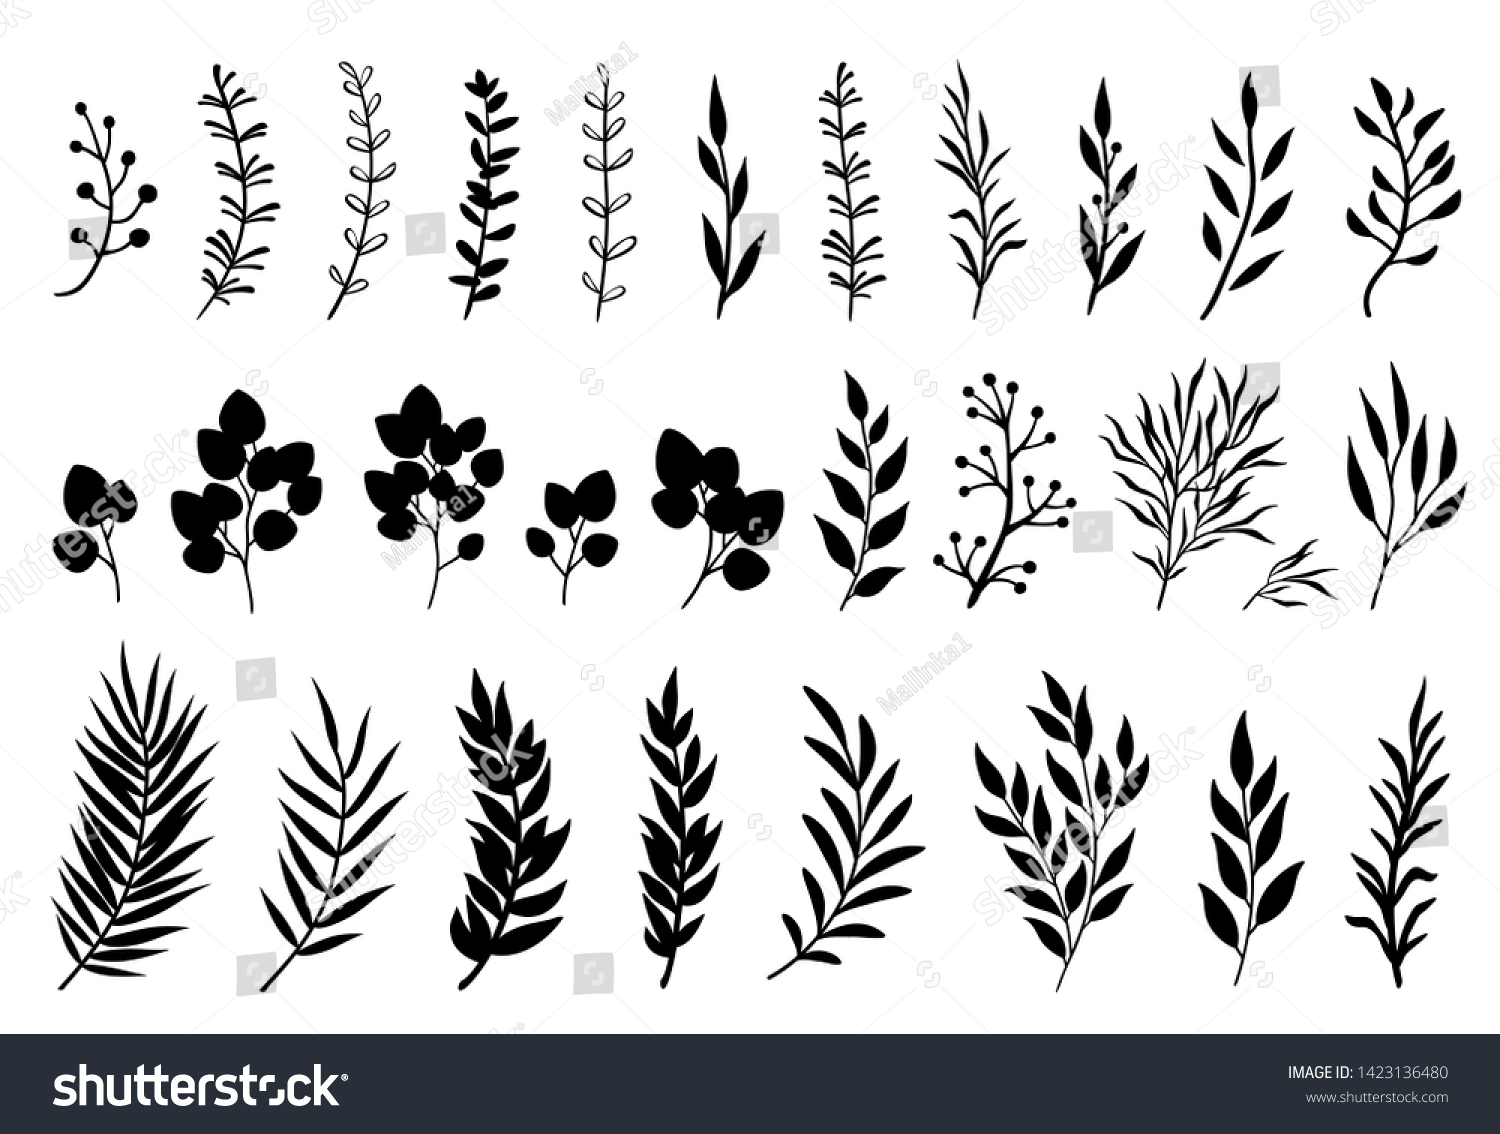 Set of tree branches, eucalyptus, palm leaves, herbs and flowers silhouettes #1423136480